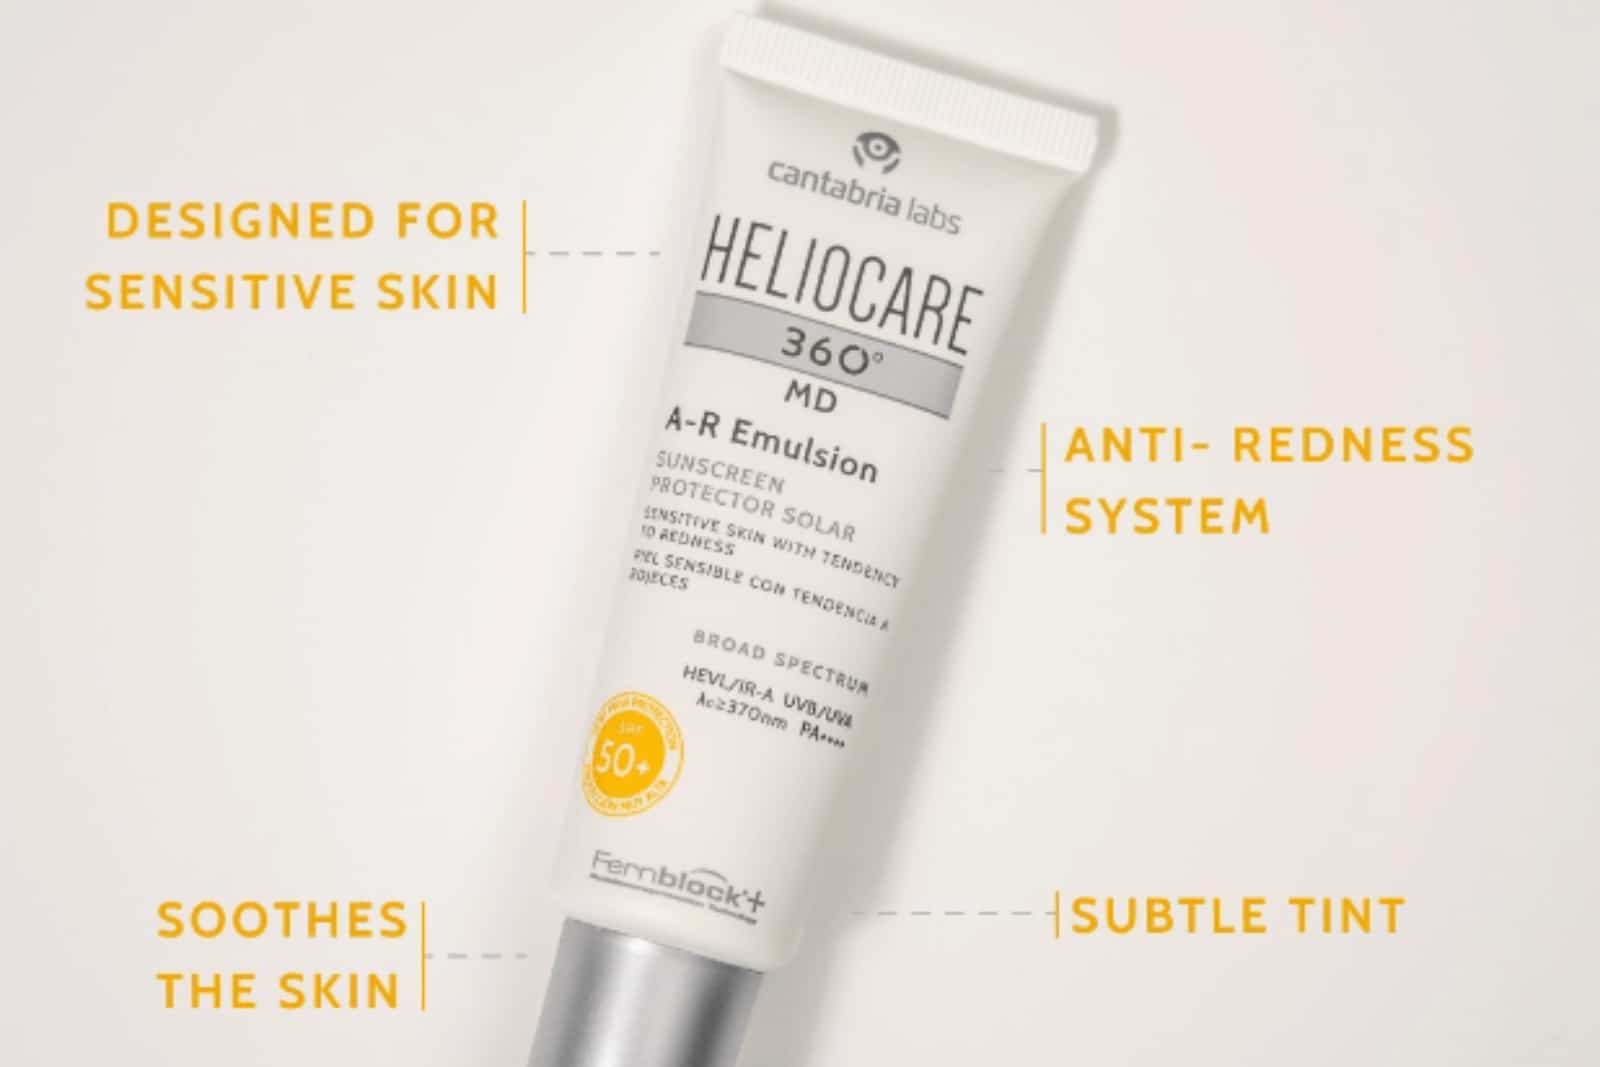 New Heliocare 360° MD A-R Emulsion SPF50+